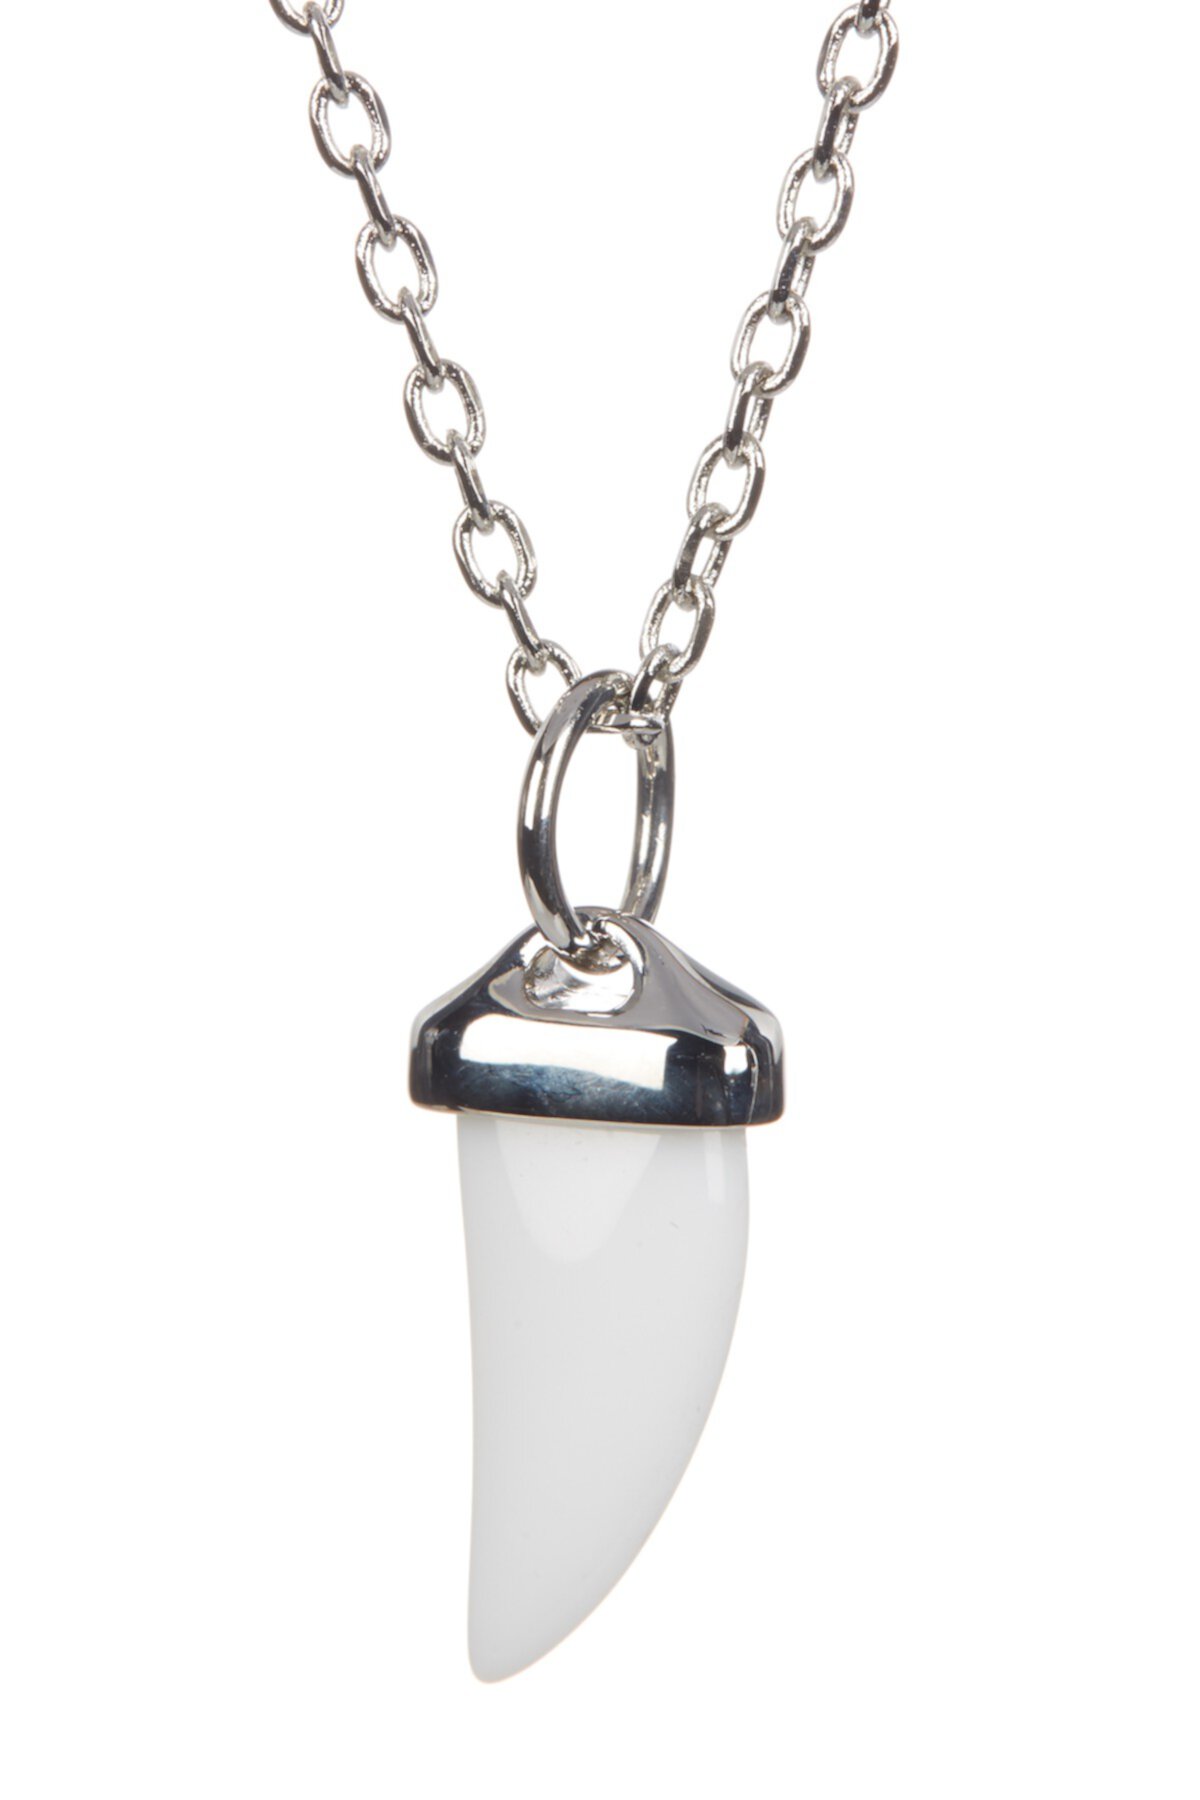 Small White Agate Tooth Necklace Link Up